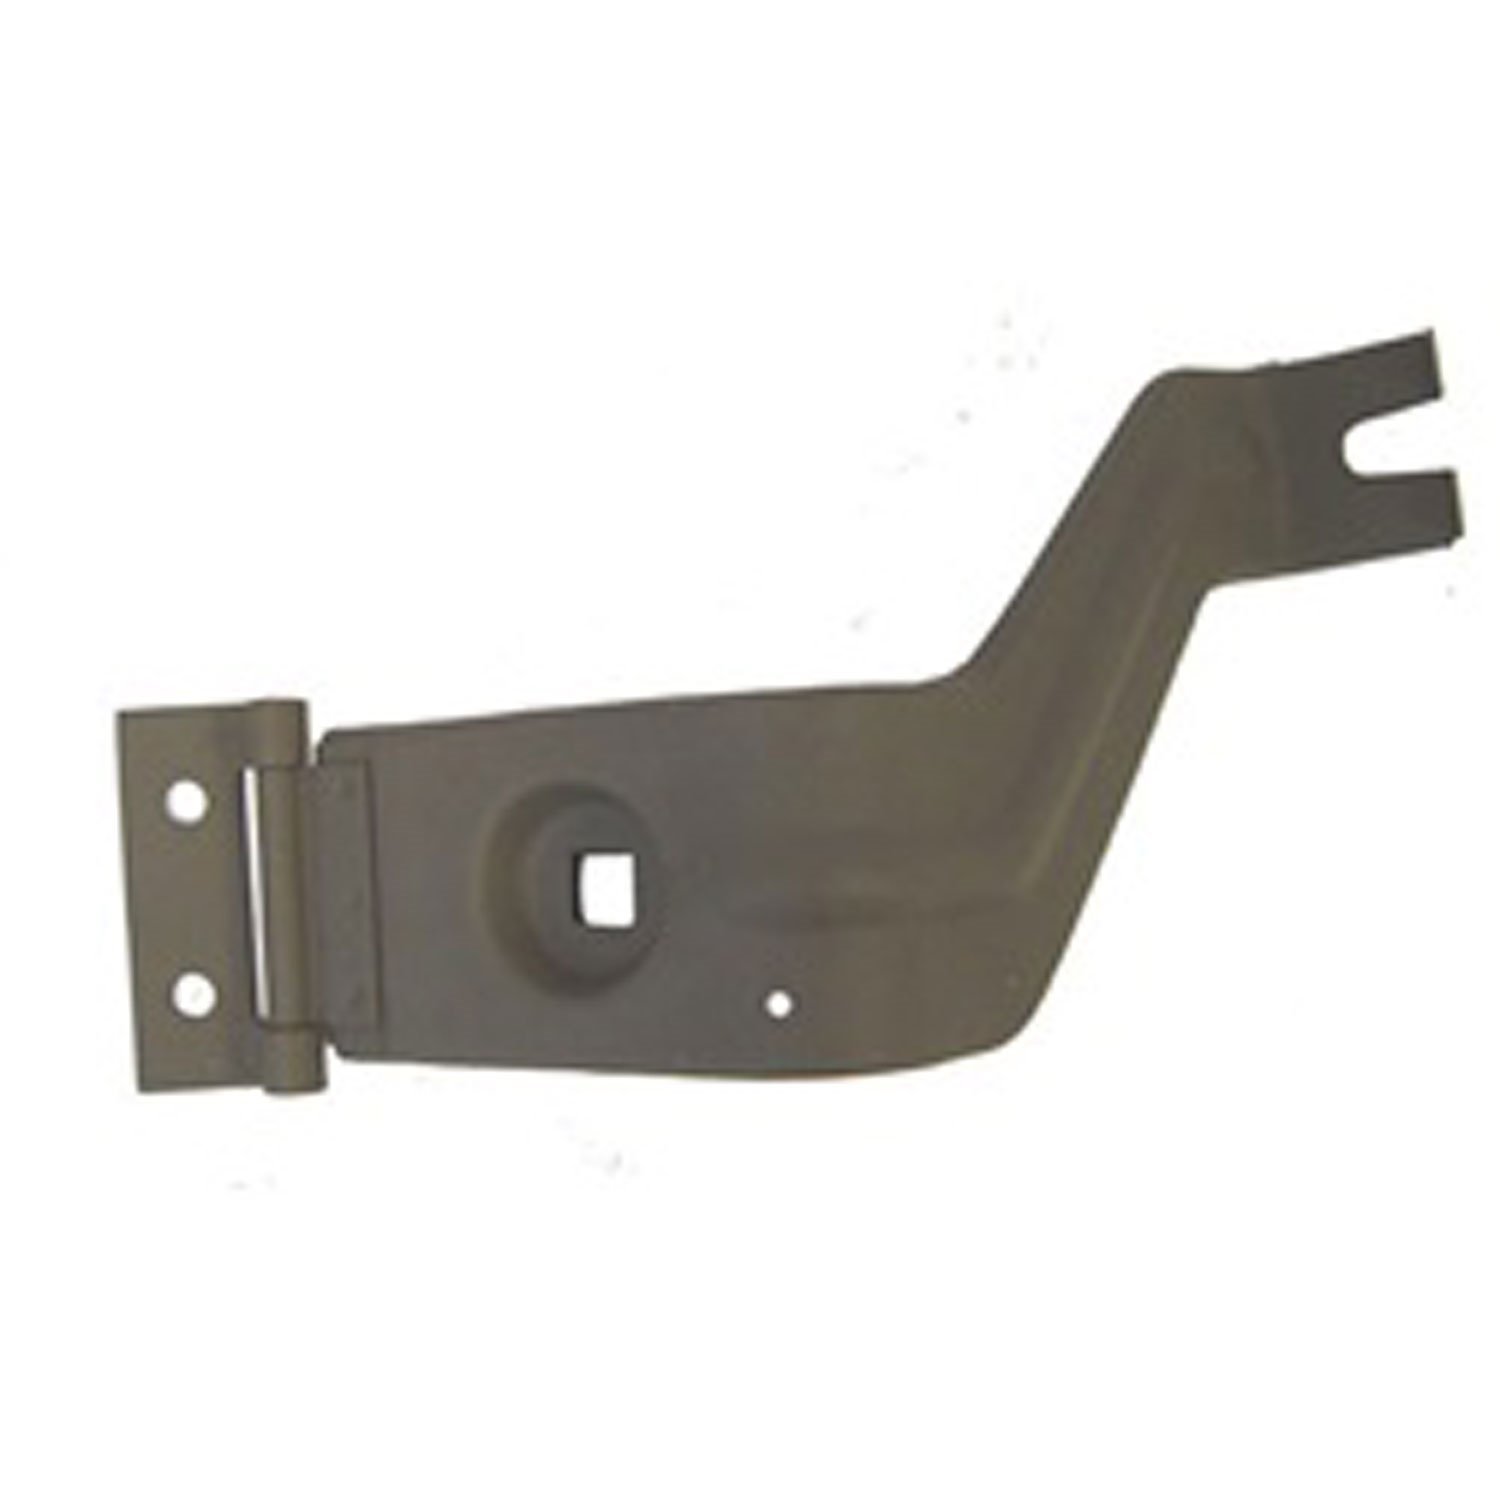 This reproduction headlight housing bracket from Omix-ADA fits the right side on 41-45 Willys MB and Ford GPW.